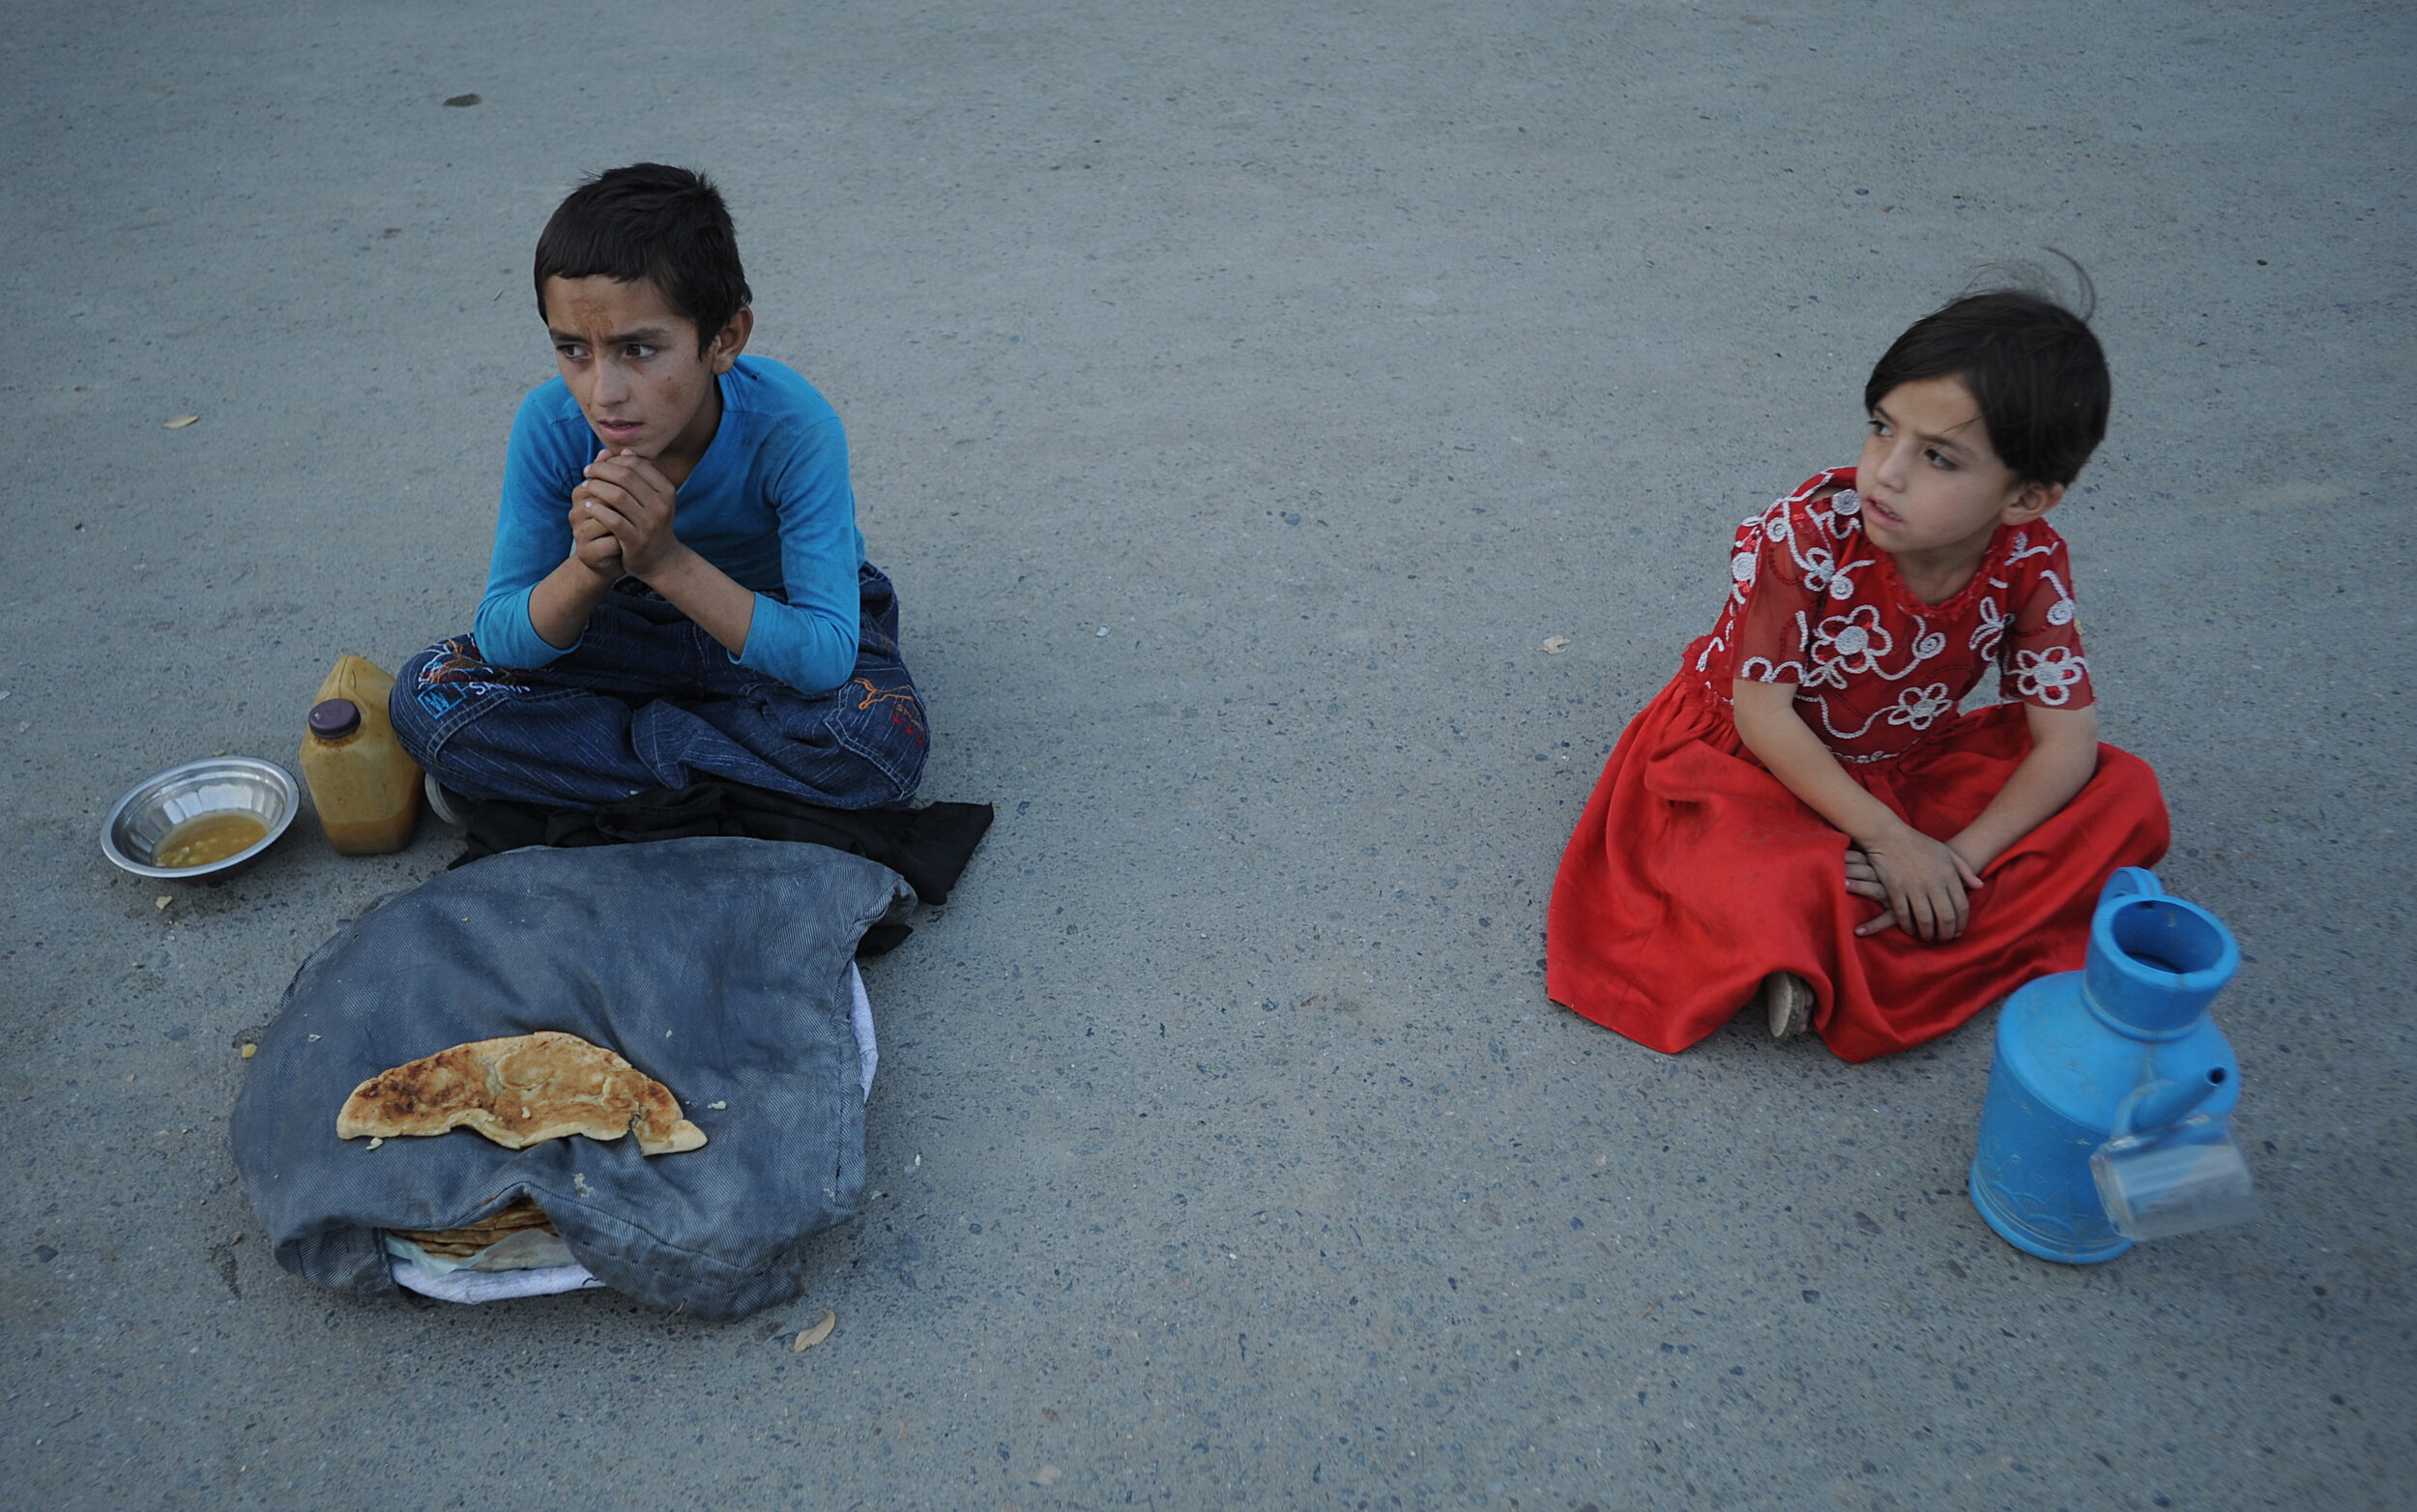  Afghan children sell their food and water at the time of Iftar (Time to break fasting) during the holy month of Ramadan in Kabul on August 30, 2009. Islam's holy month of Ramadan is calculated on the sighting of the new moon. Muslims all over the wo